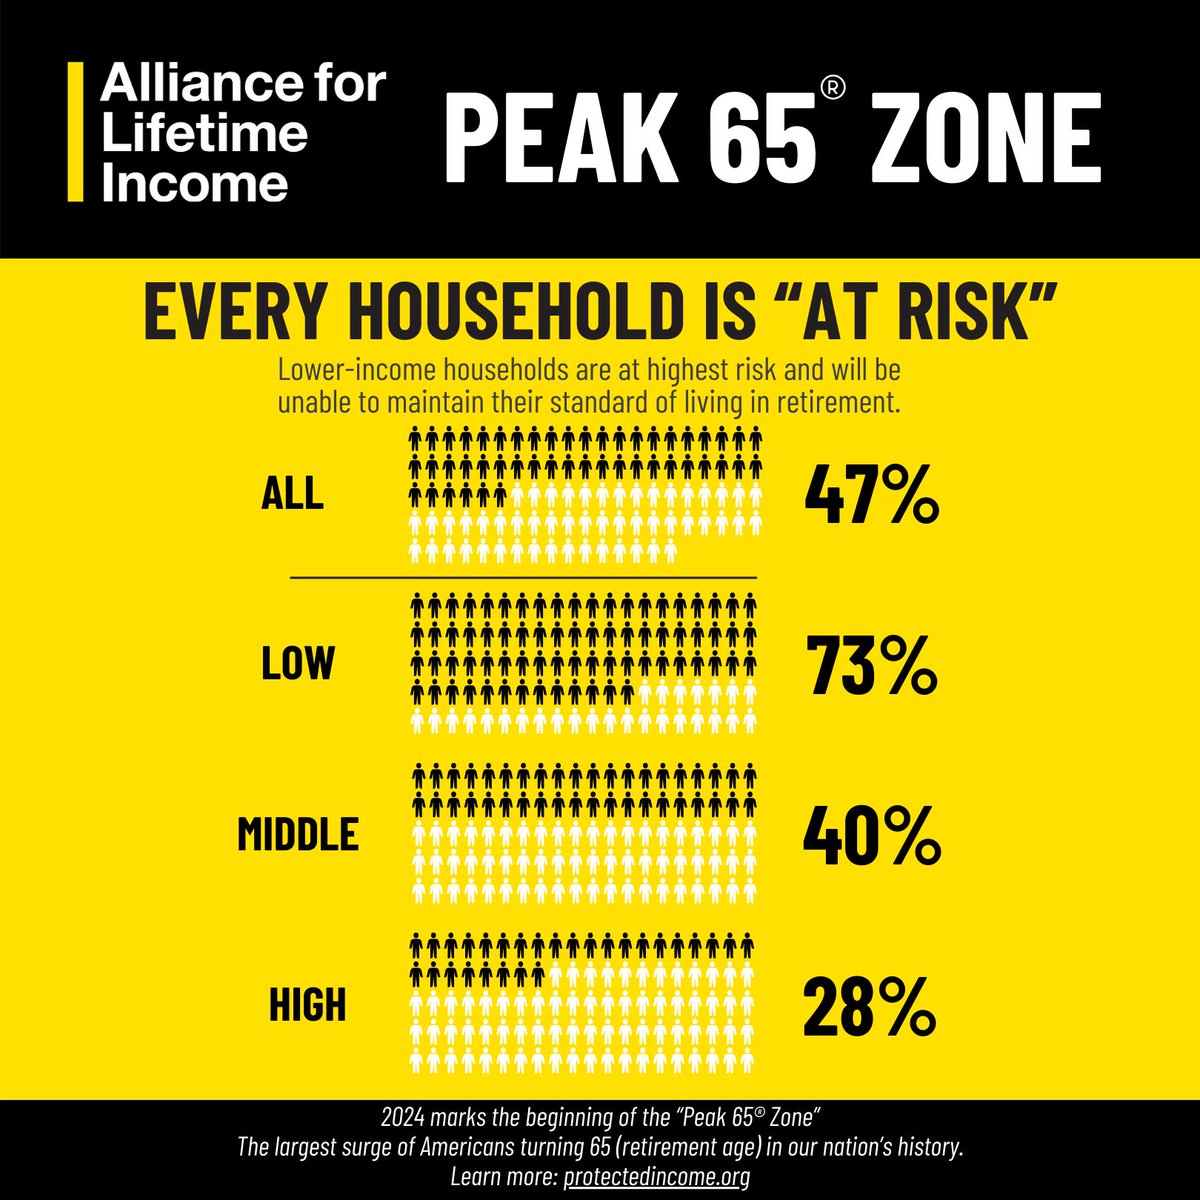 America is officially in the #Peak65Zone. More than 4.1 million Americans will turn 65 each year now through 2027. @JJFichtner explains this historic moment and what it means for the future of retirement. protectedincome.org/peak65/